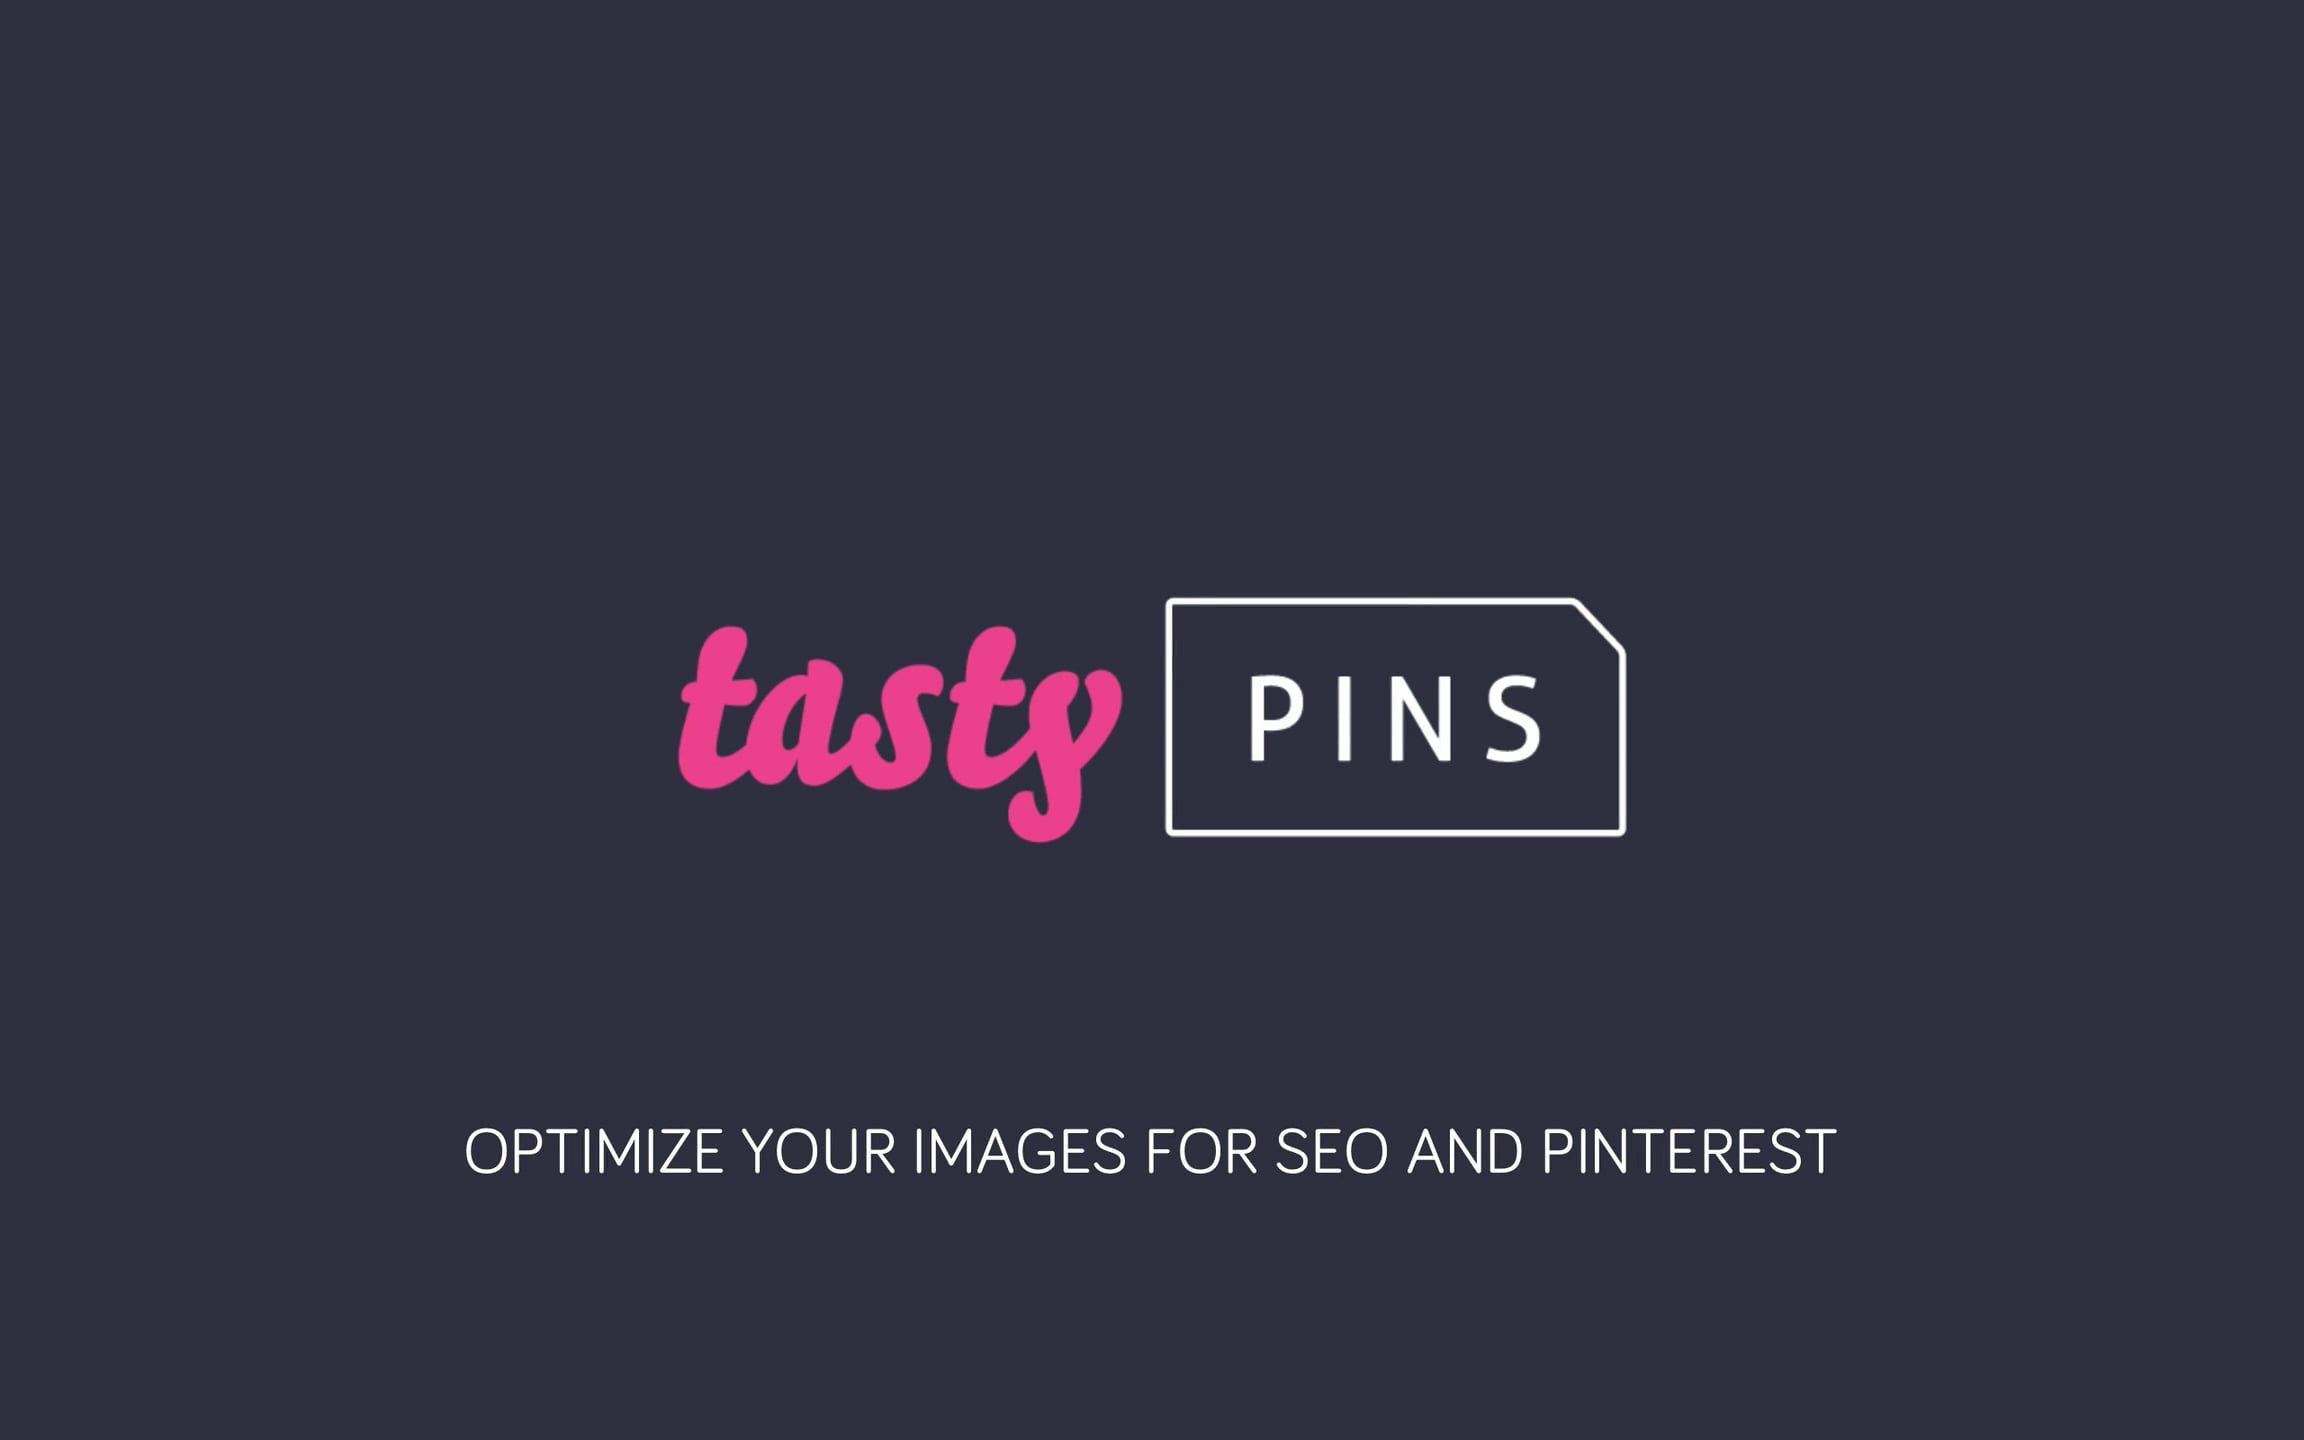 free download Tasty Pins nulled